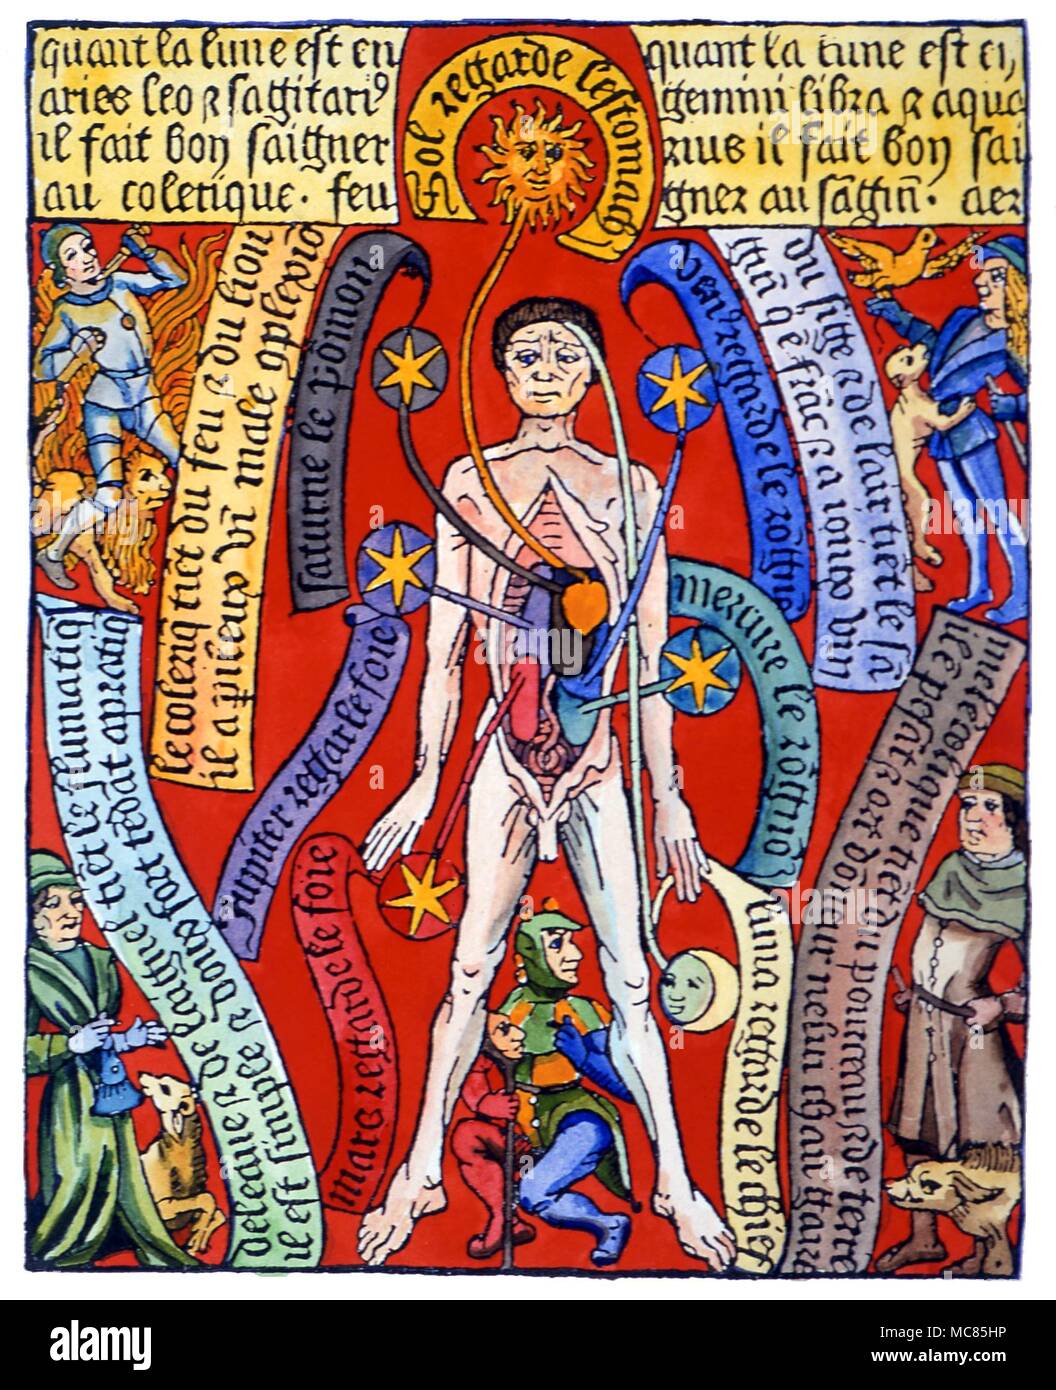 Alchemy - the four temperaments. Alchemical-medical chart showing relationship of the inner organs of Man to the planetary system, with the four temperaments in the corners. Top left: Choleric Top right: Sanguine Bottom left: Phlegmatic Bottom right: Melancholic. Woodblock print of circa 1503. Stock Photo